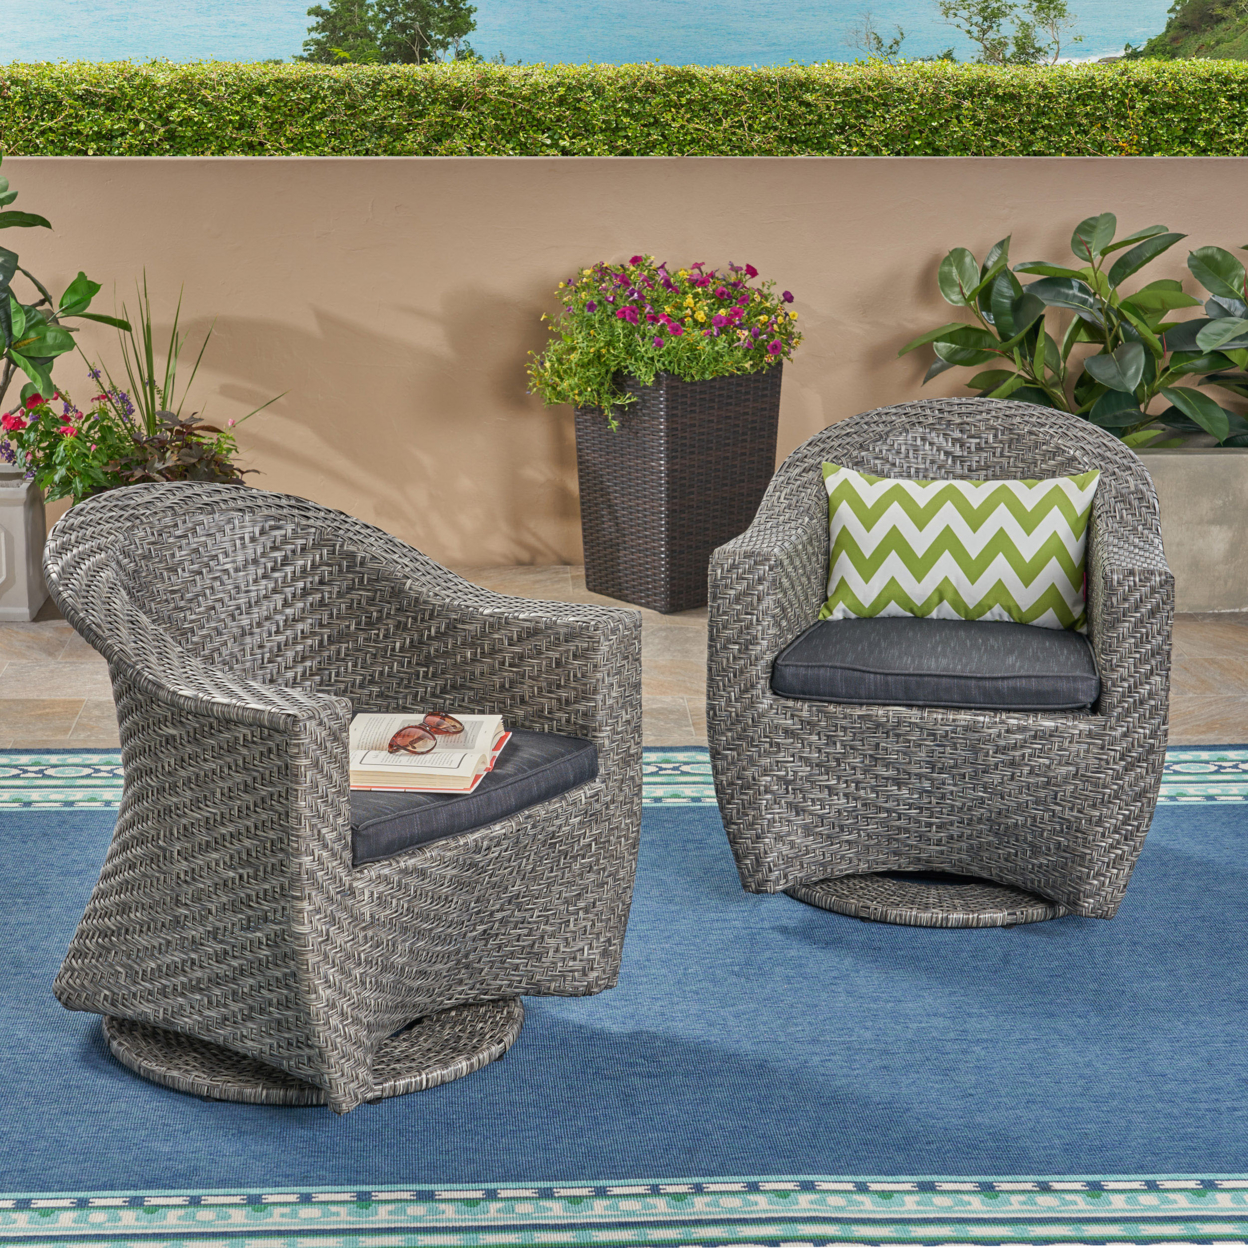 Larchmont Patio Swivel Chairs, Wicker With Outdoor Cushions, Mixed Black And Dark Gray - Default, Set Of 4